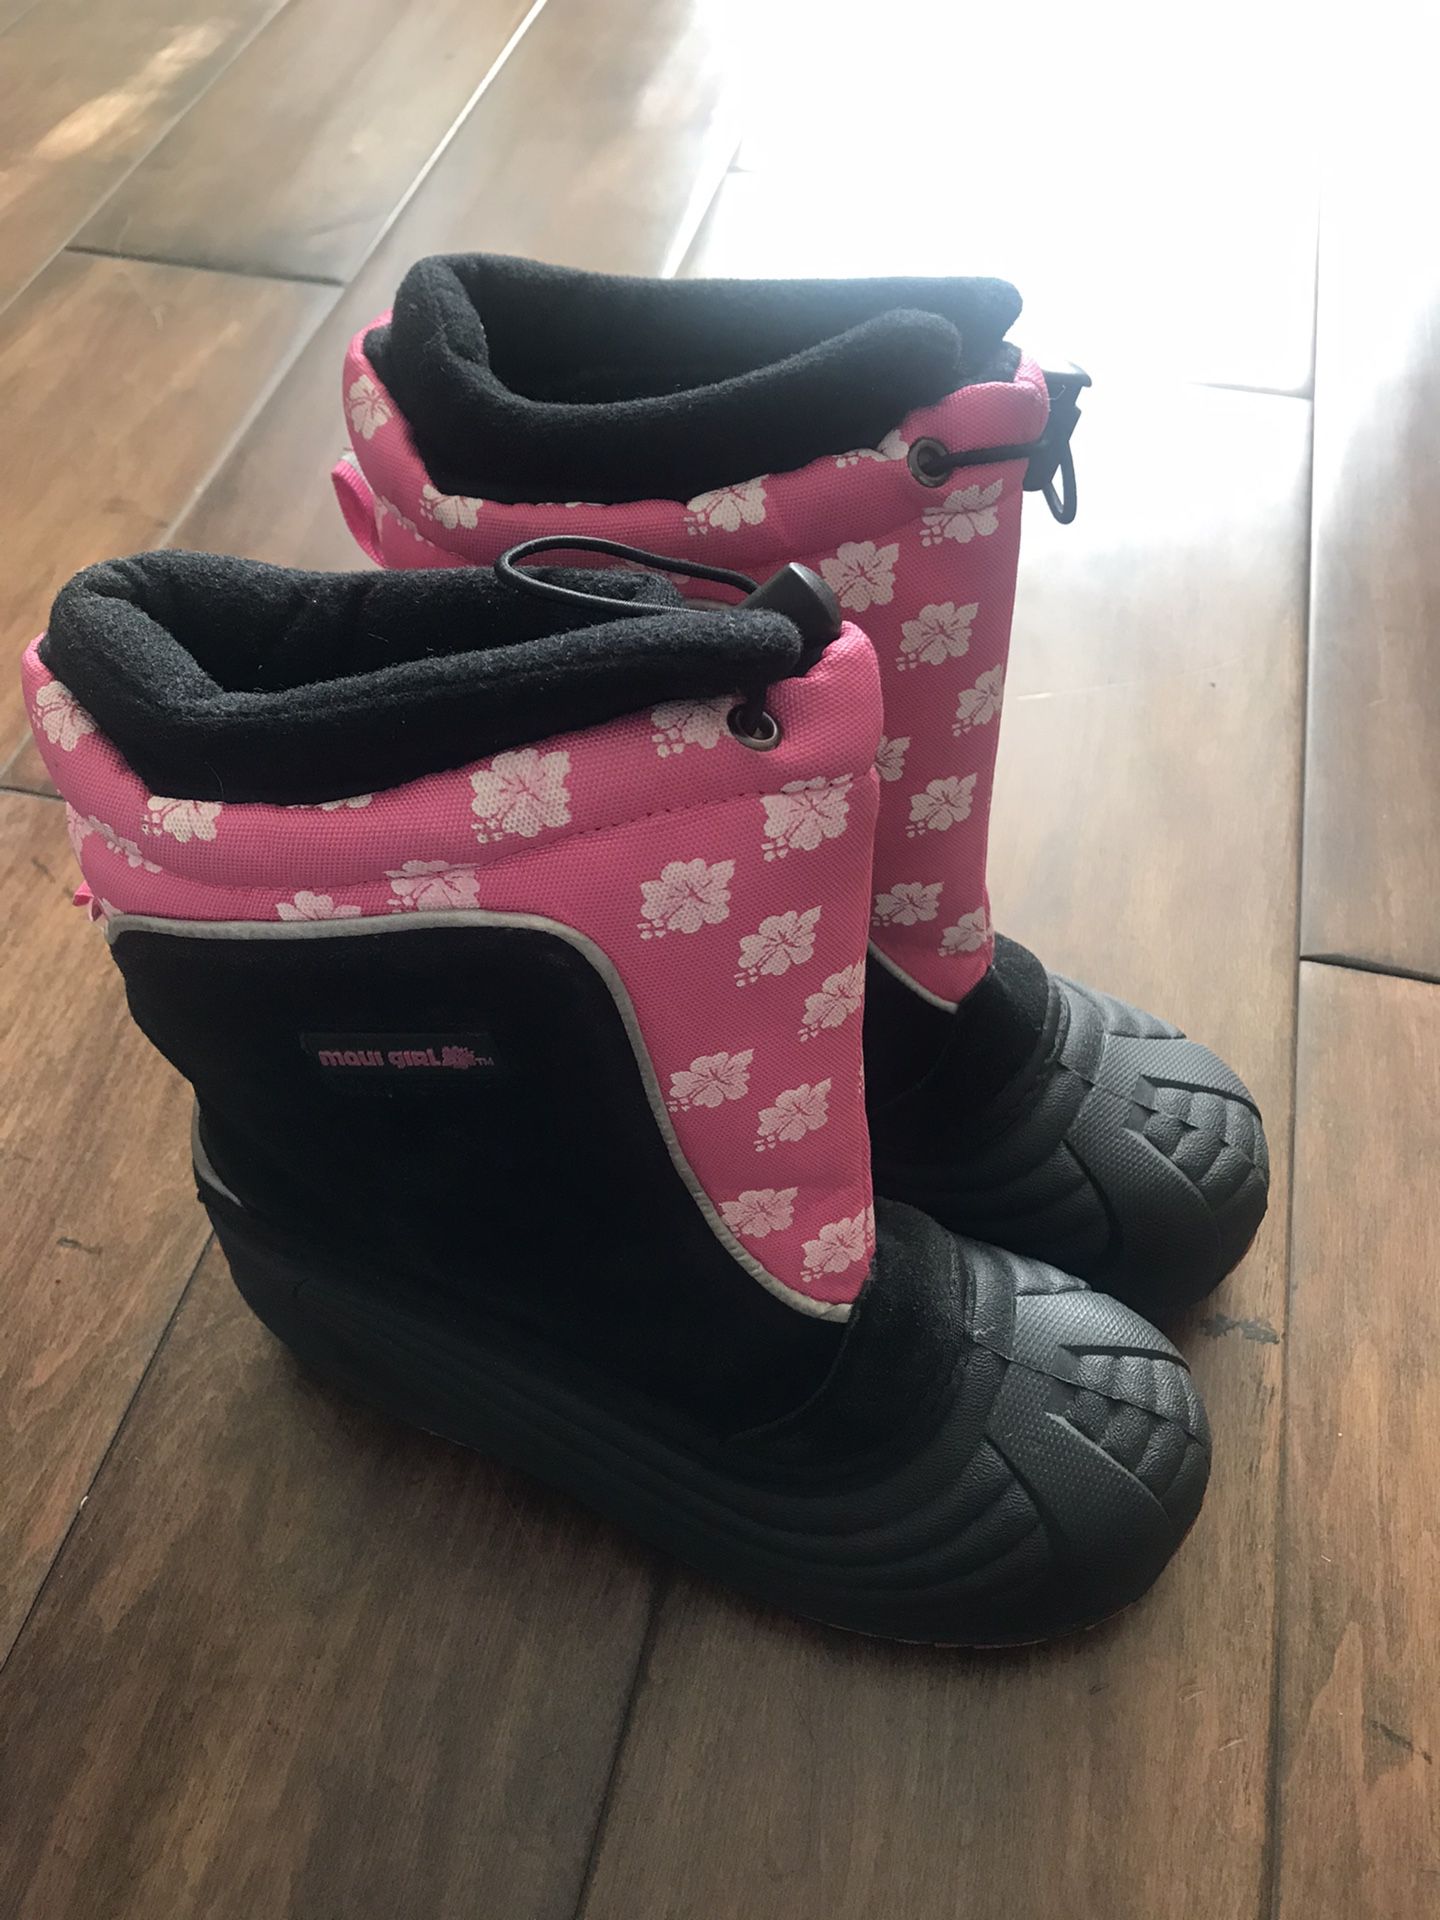 Snow boots girls pink size 4